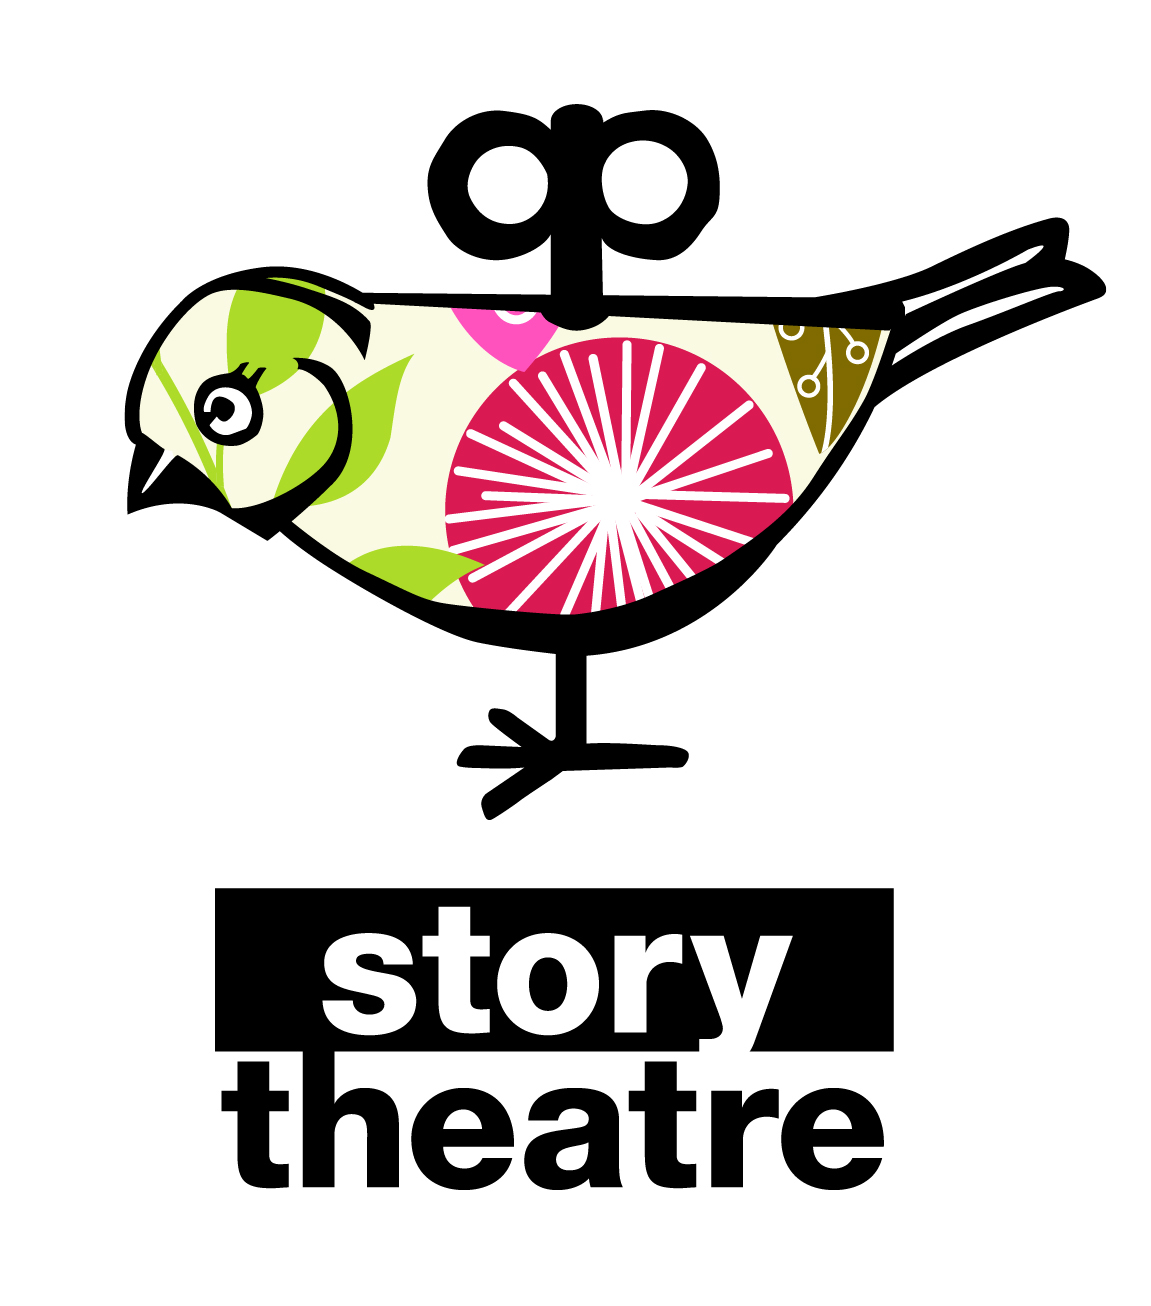 Story Theatre logo - there is a bird with a windup toy key on its back, with a green and red print of flowers and leaves in a retro kitsch aesthetic